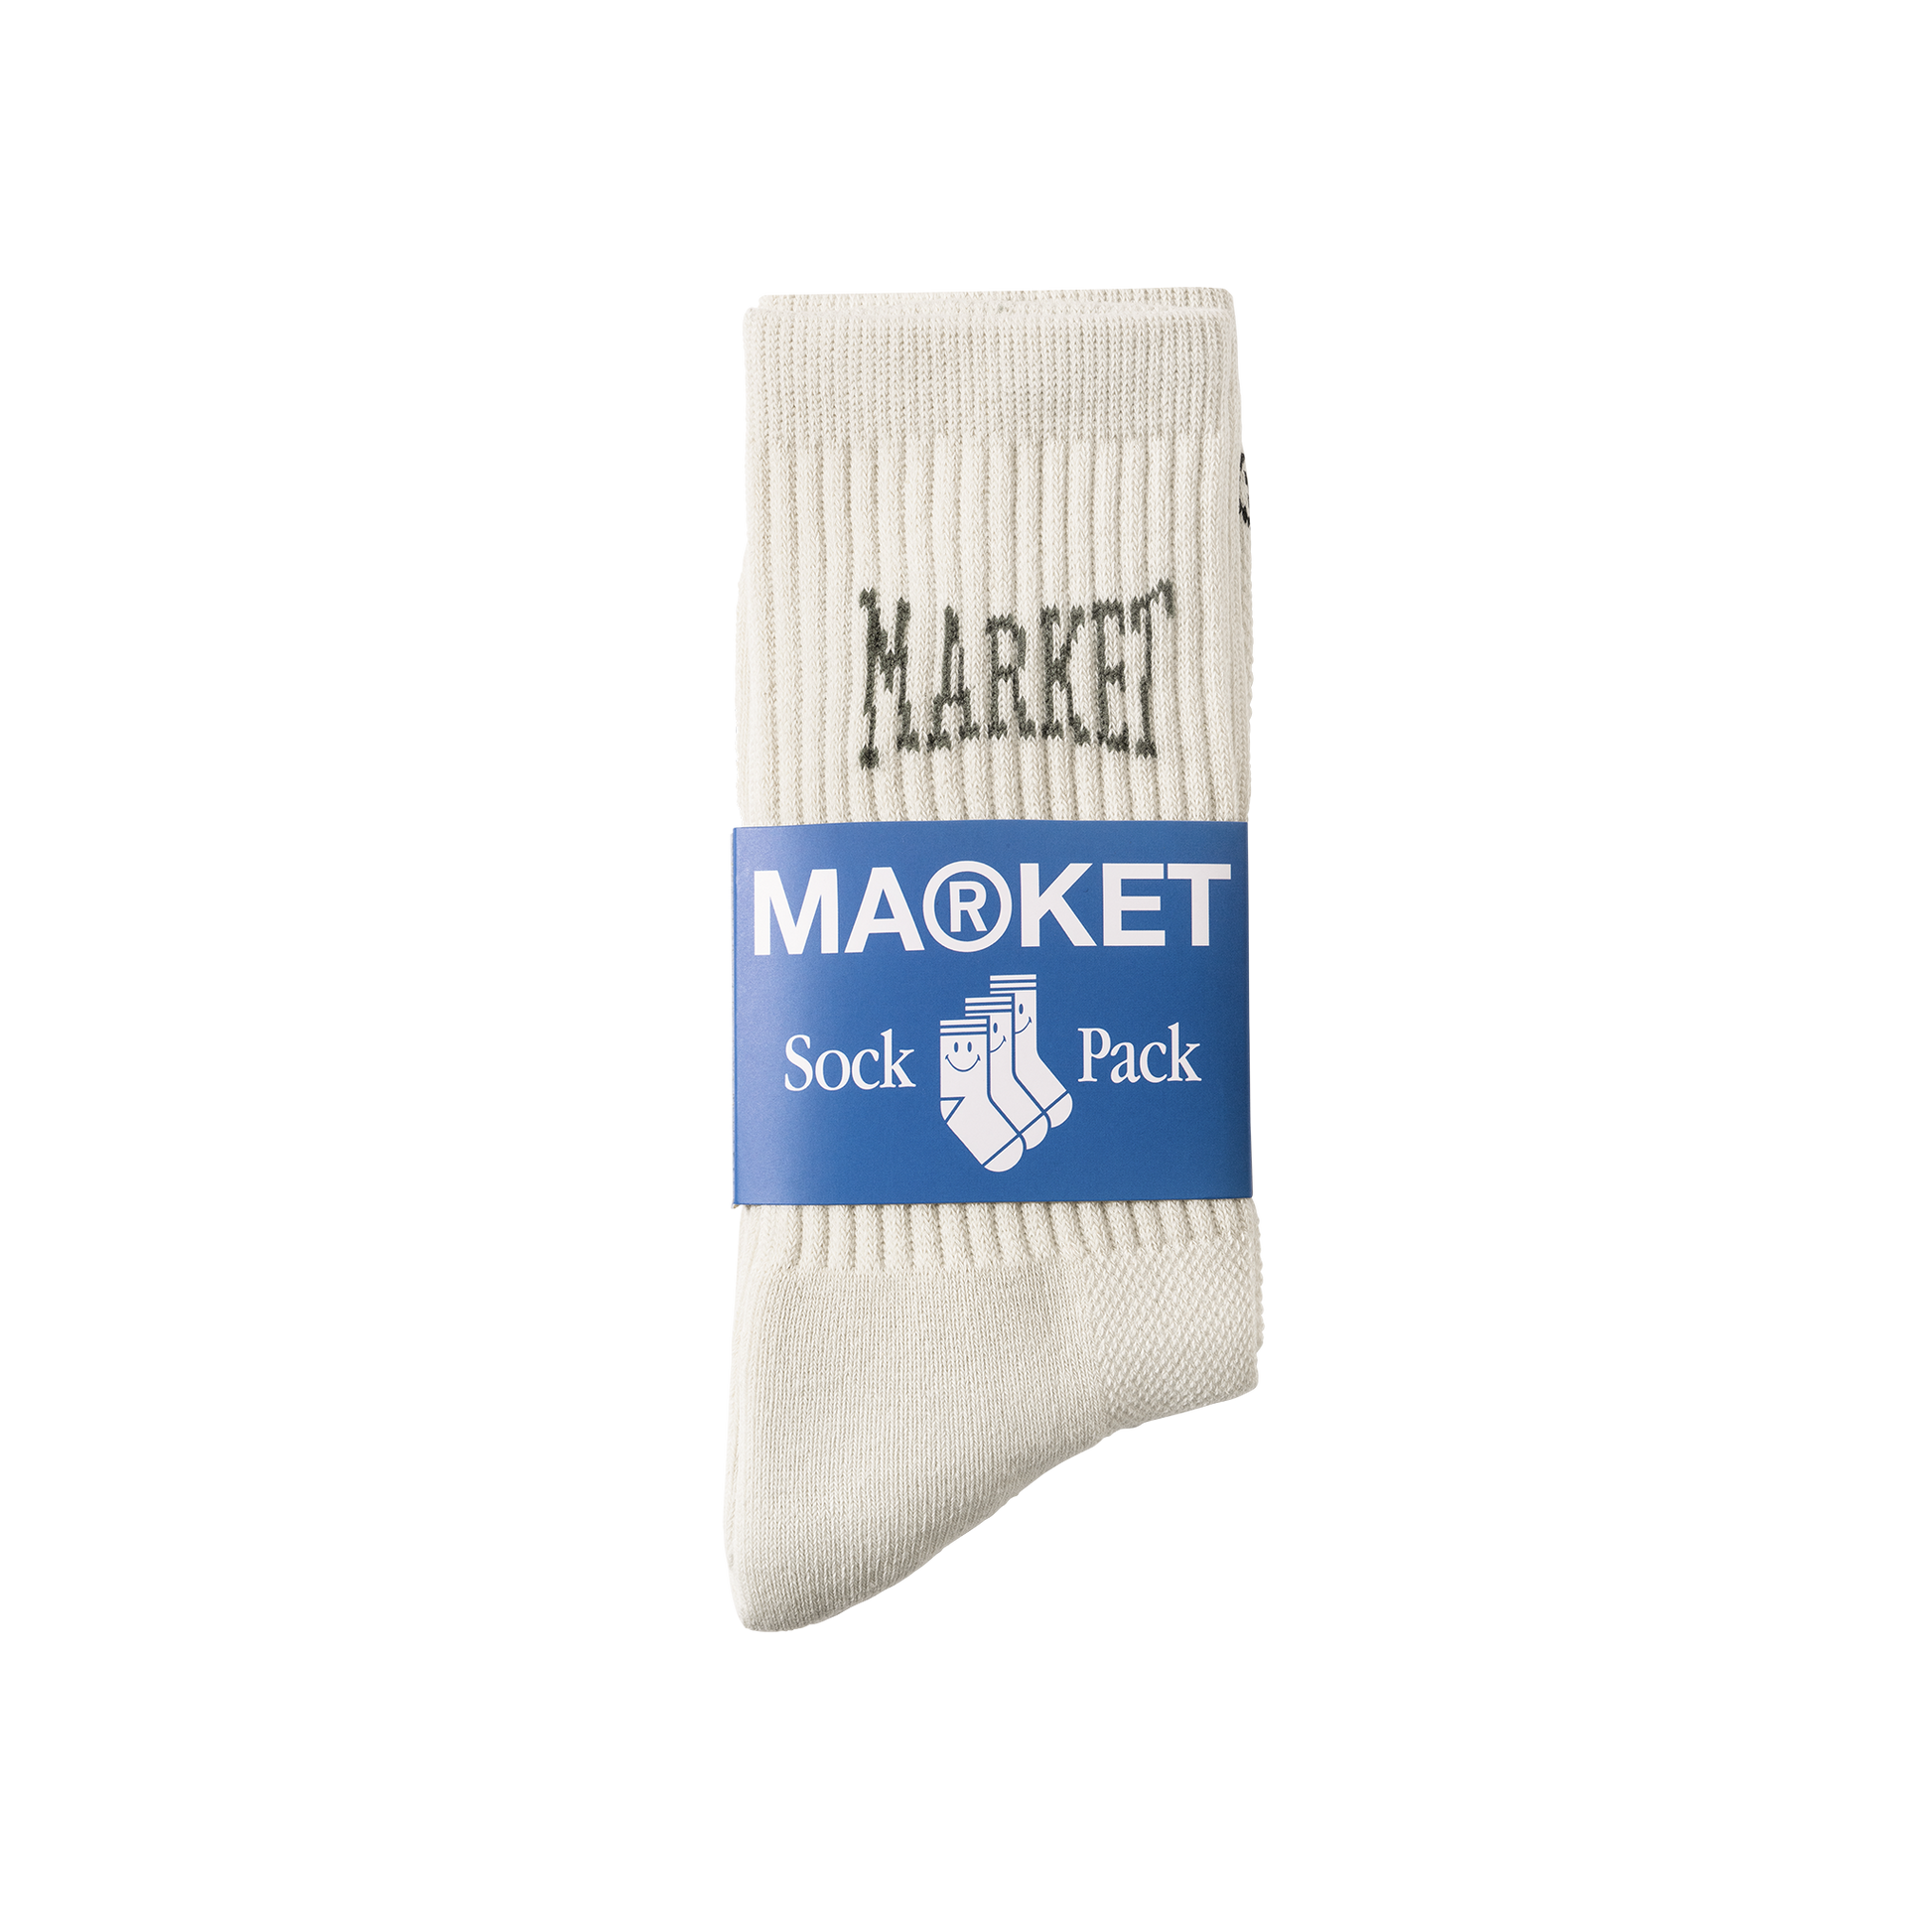 MARKET clothing brand PERSISTENT SOCKS. Find more graphic tees, socks, hats and small goods at MarketStudios.com. Formally Chinatown Market. 